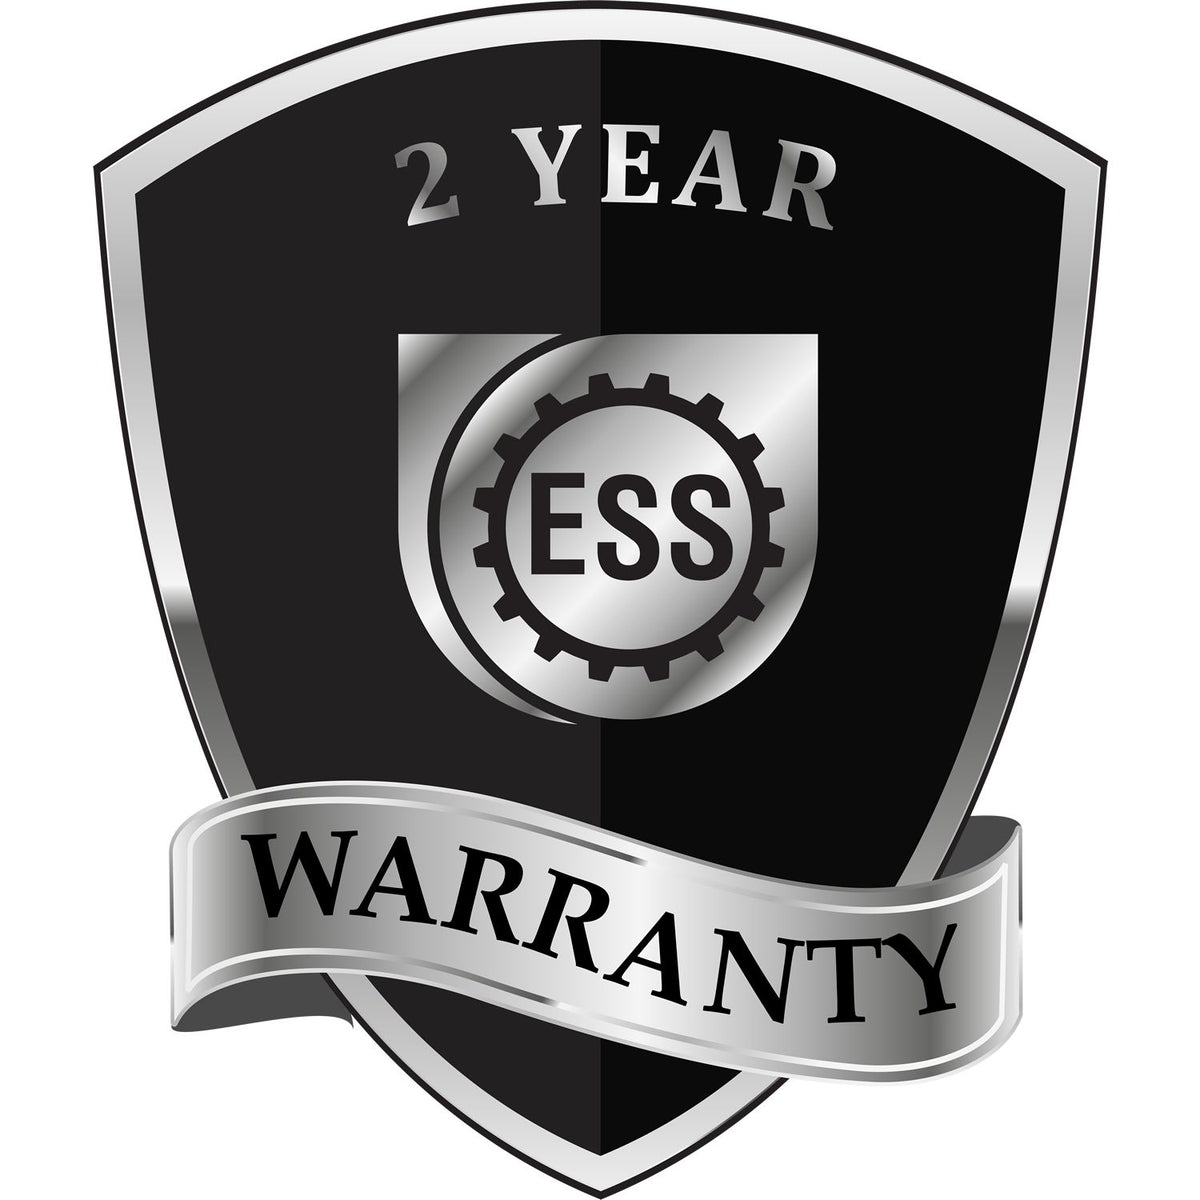 A badge or emblem showing a warranty icon for the Heavy Duty Cast Iron Utah Architect Embosser